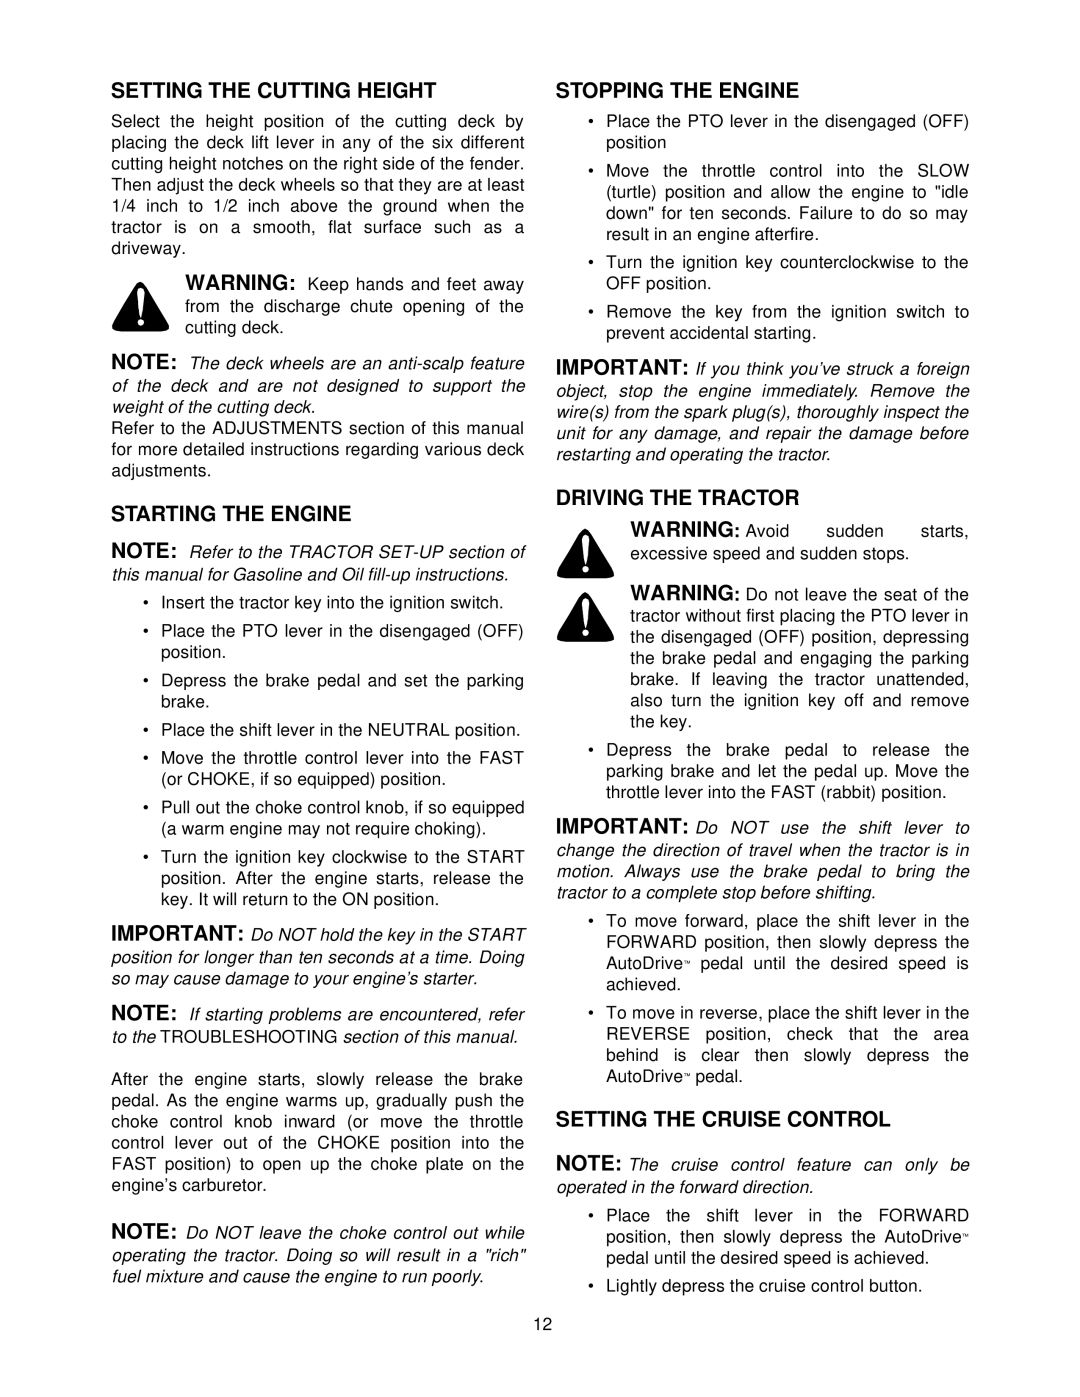 Troy-Bilt 604 manual Setting The Cutting Height, Starting The Engine, Stopping The Engine, Driving The Tractor 